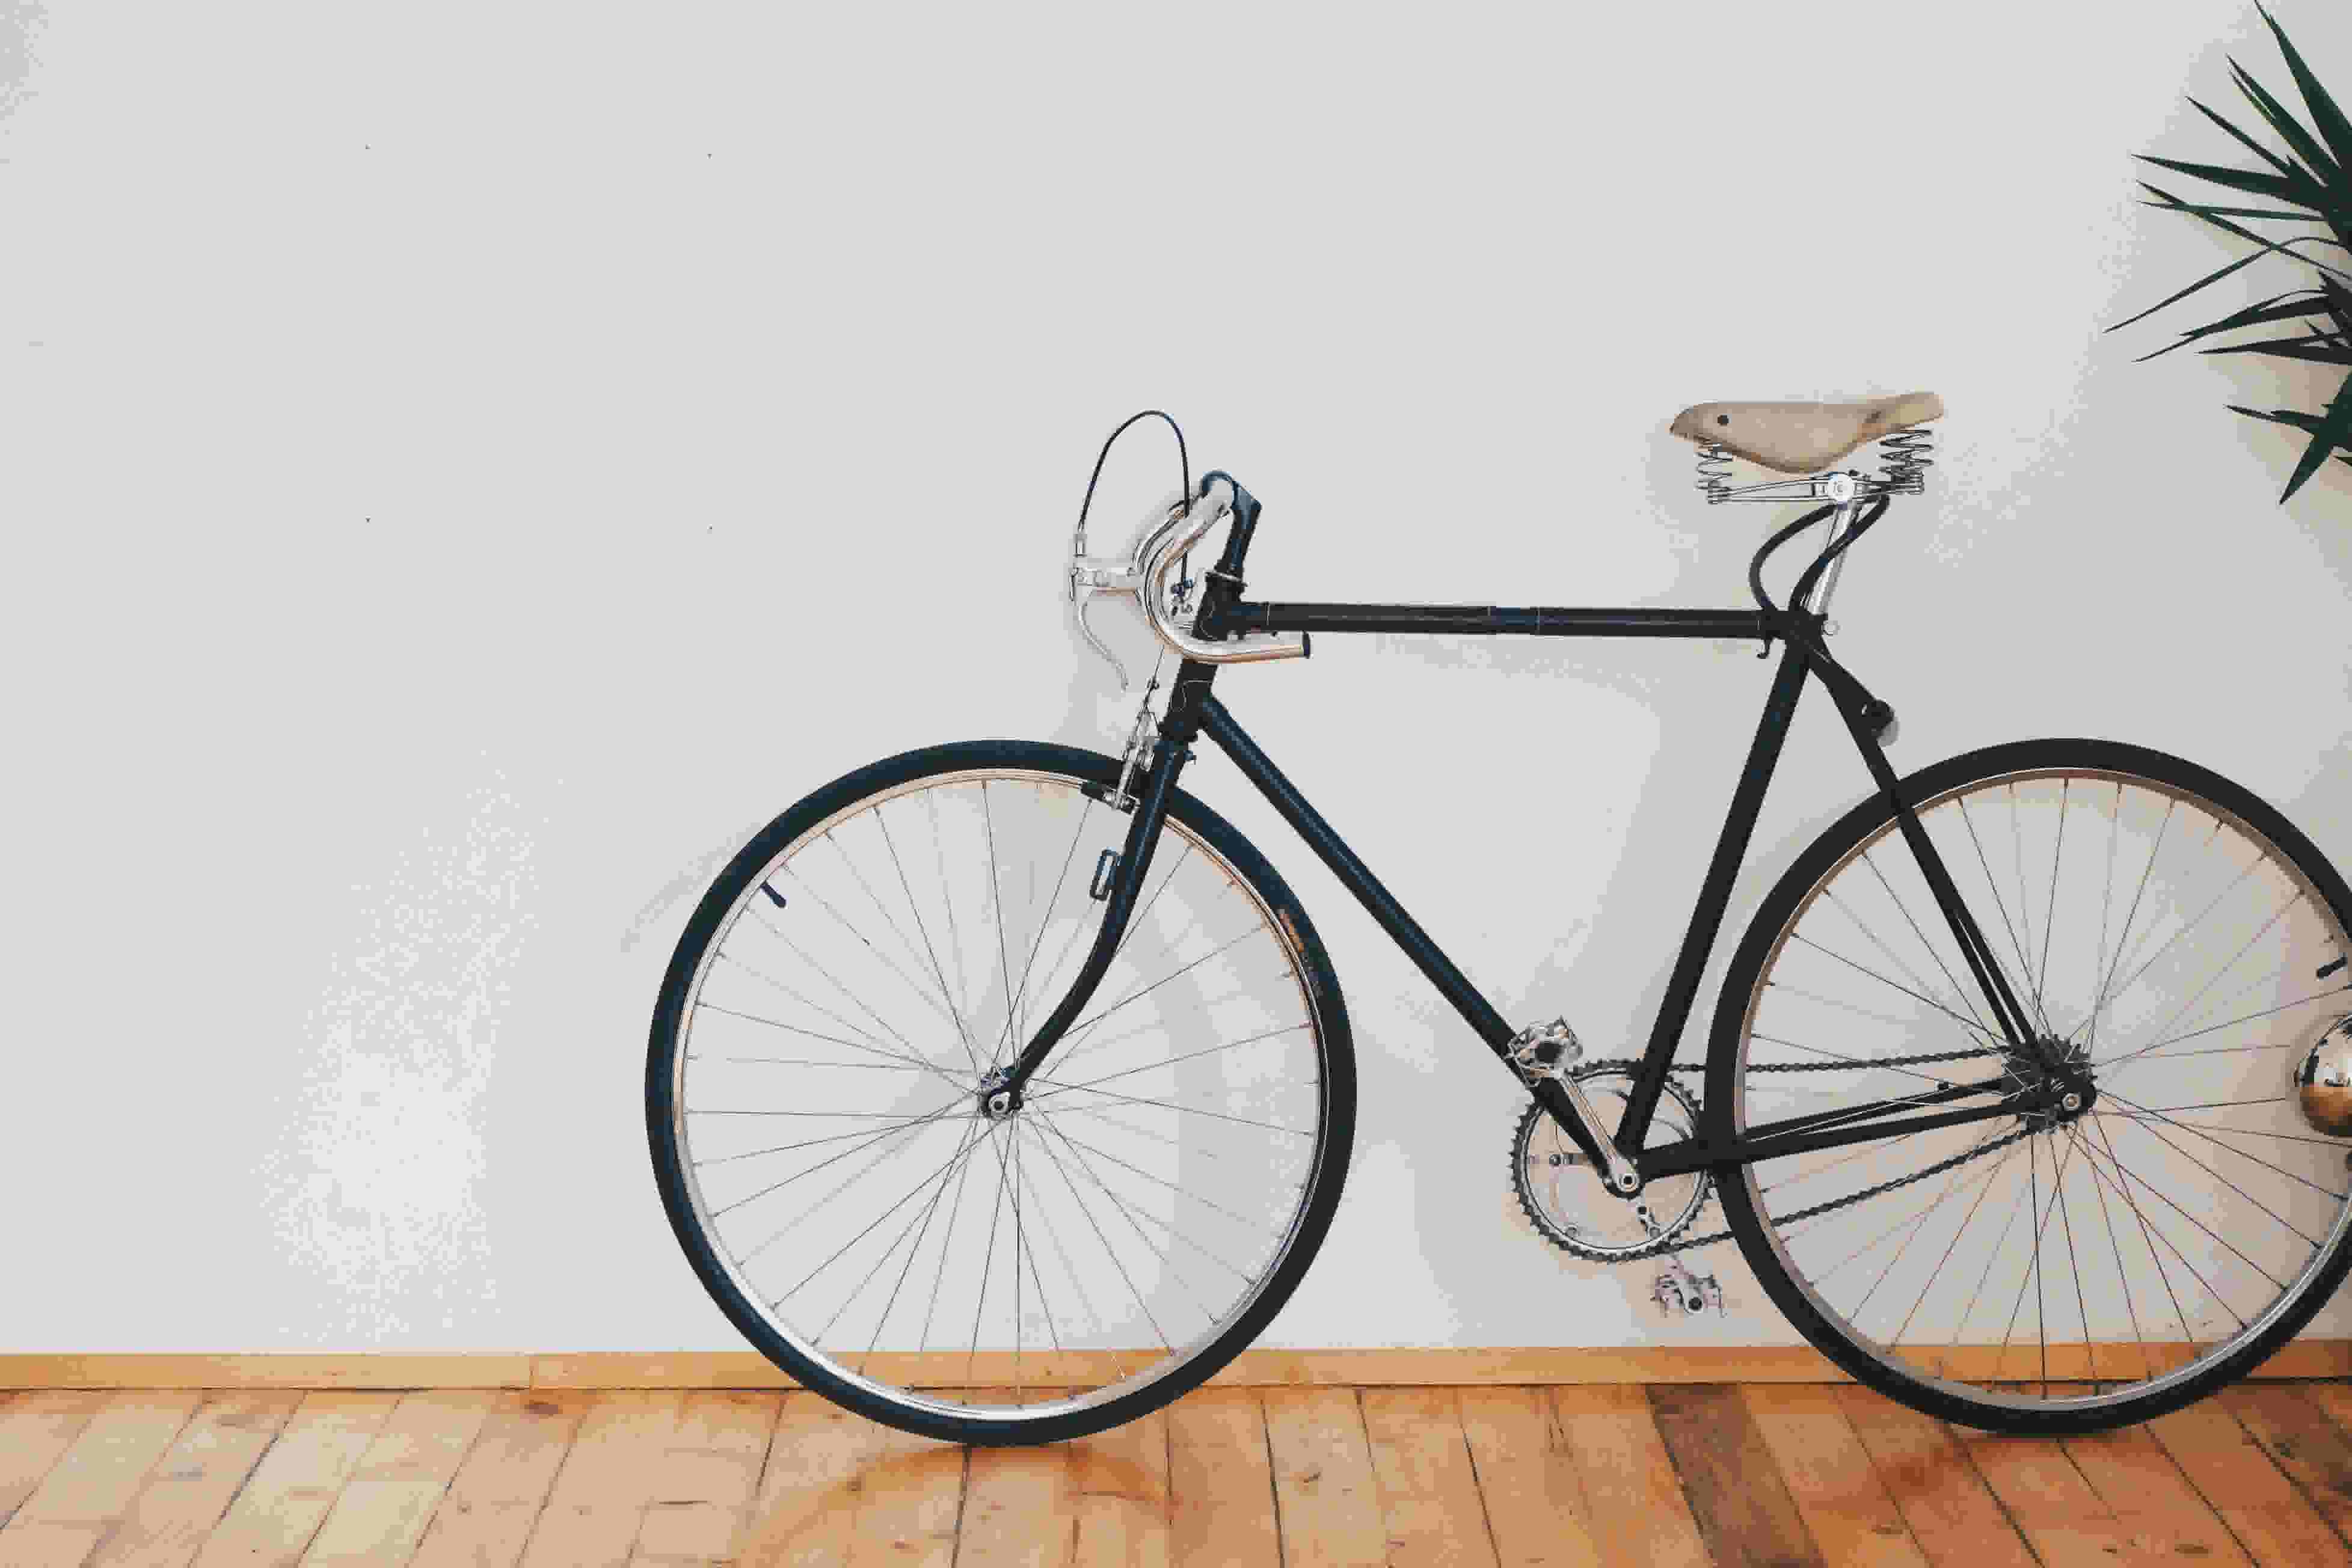 A bicycle propped against a white wall